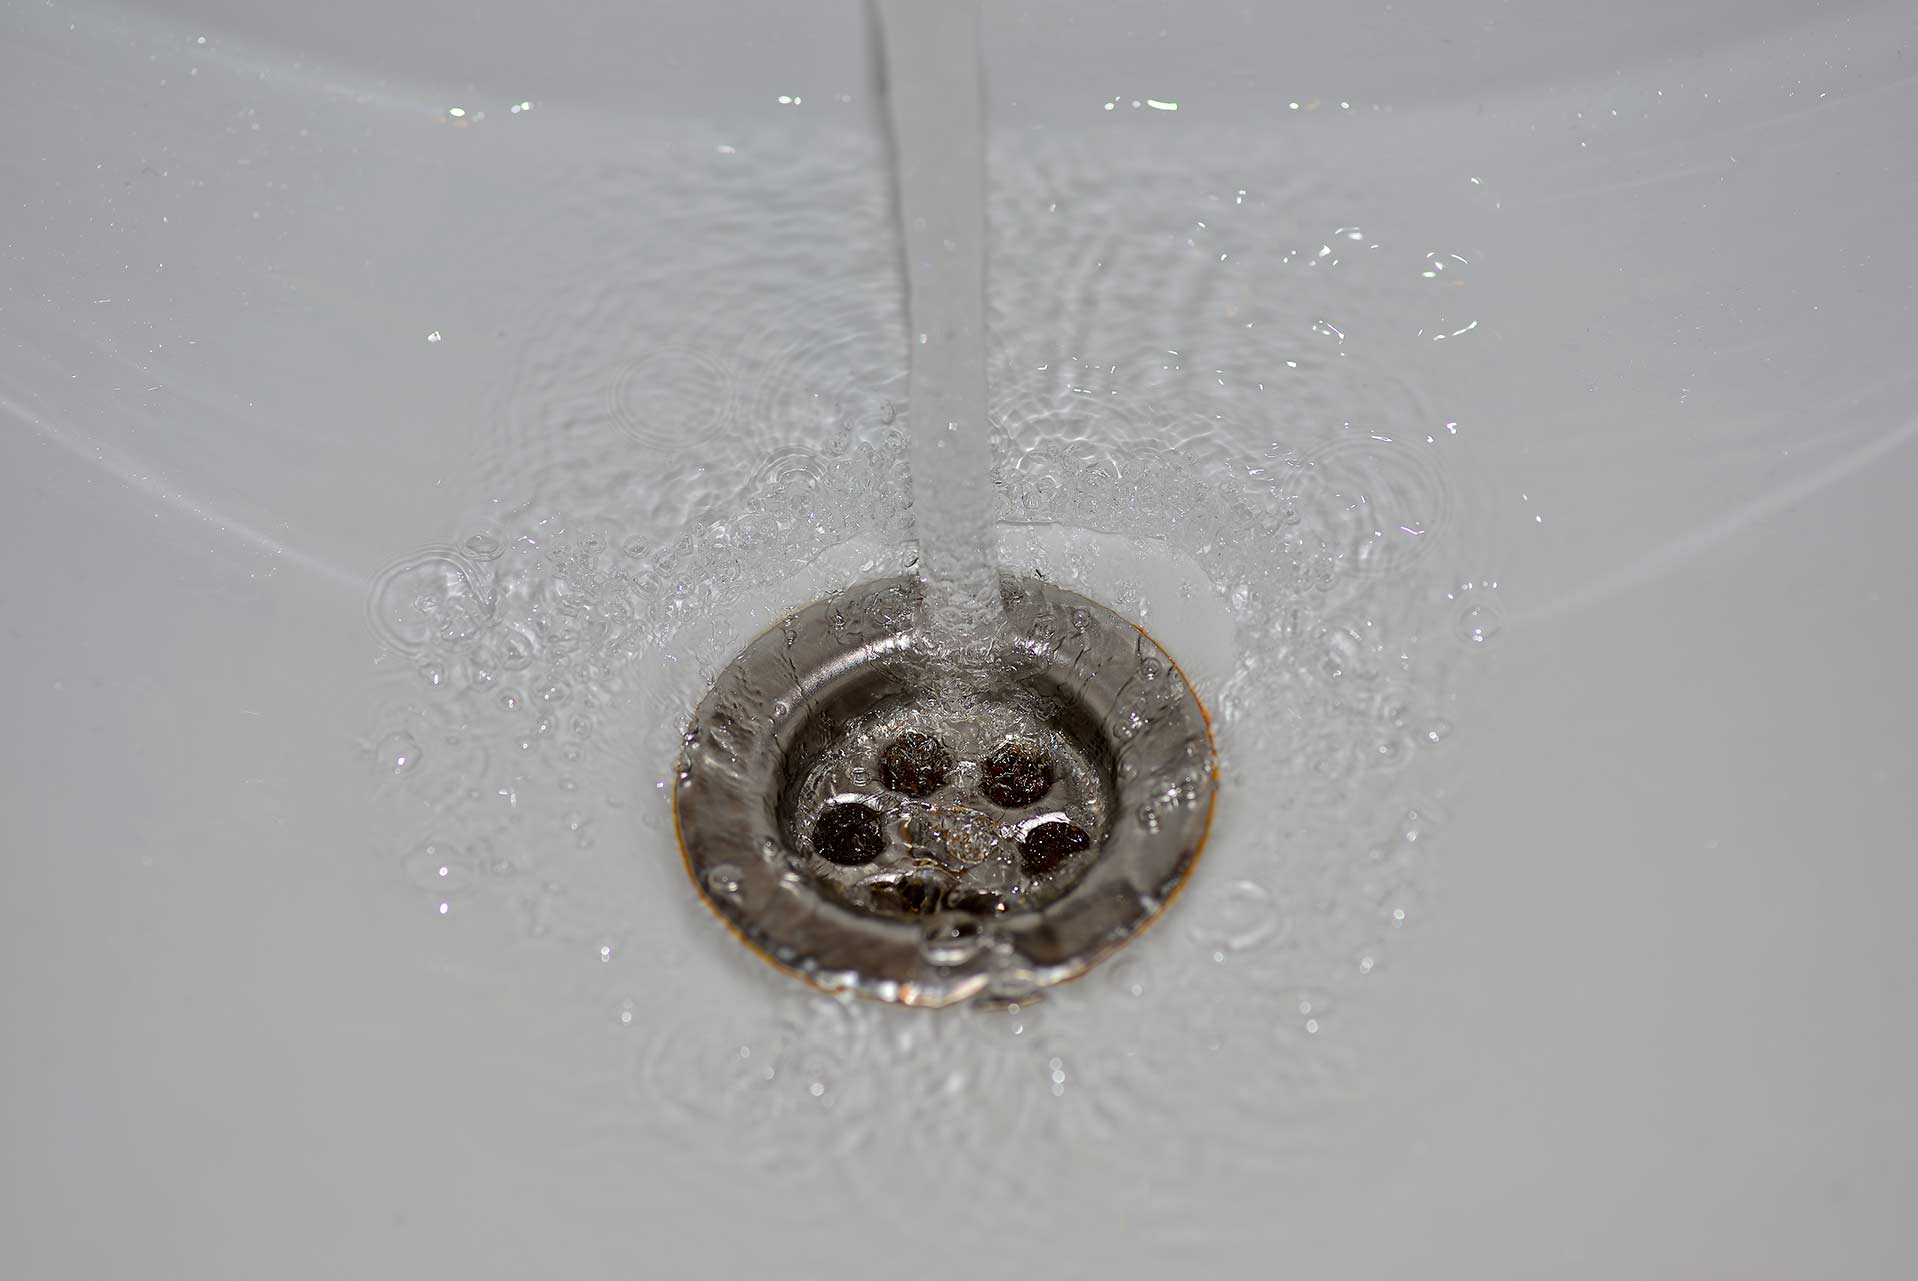 A2B Drains provides services to unblock blocked sinks and drains for properties in Bacup.